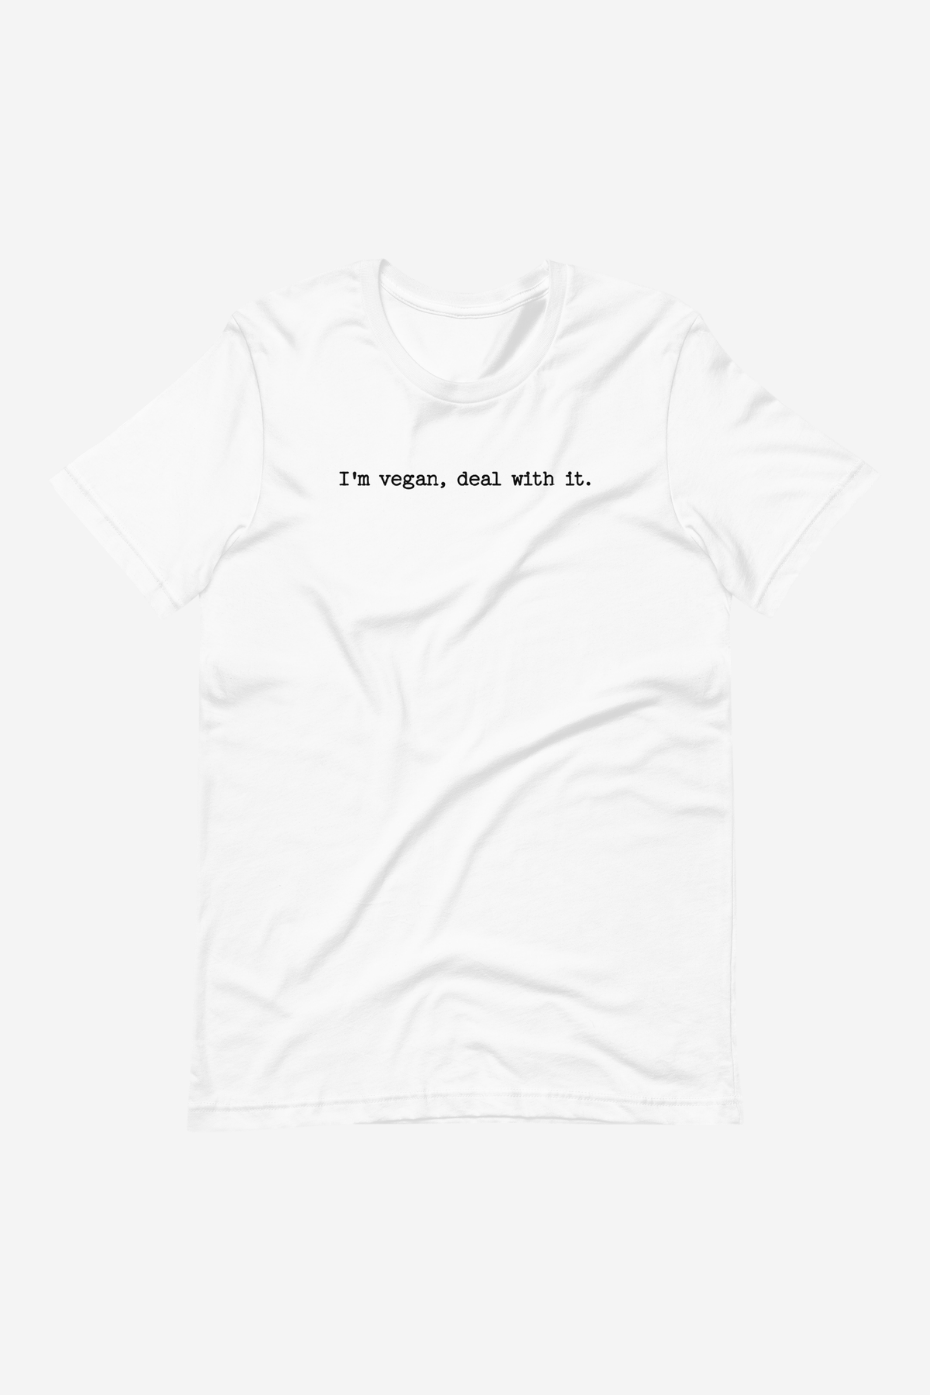 Deal With It Unisex Basic T-Shirt